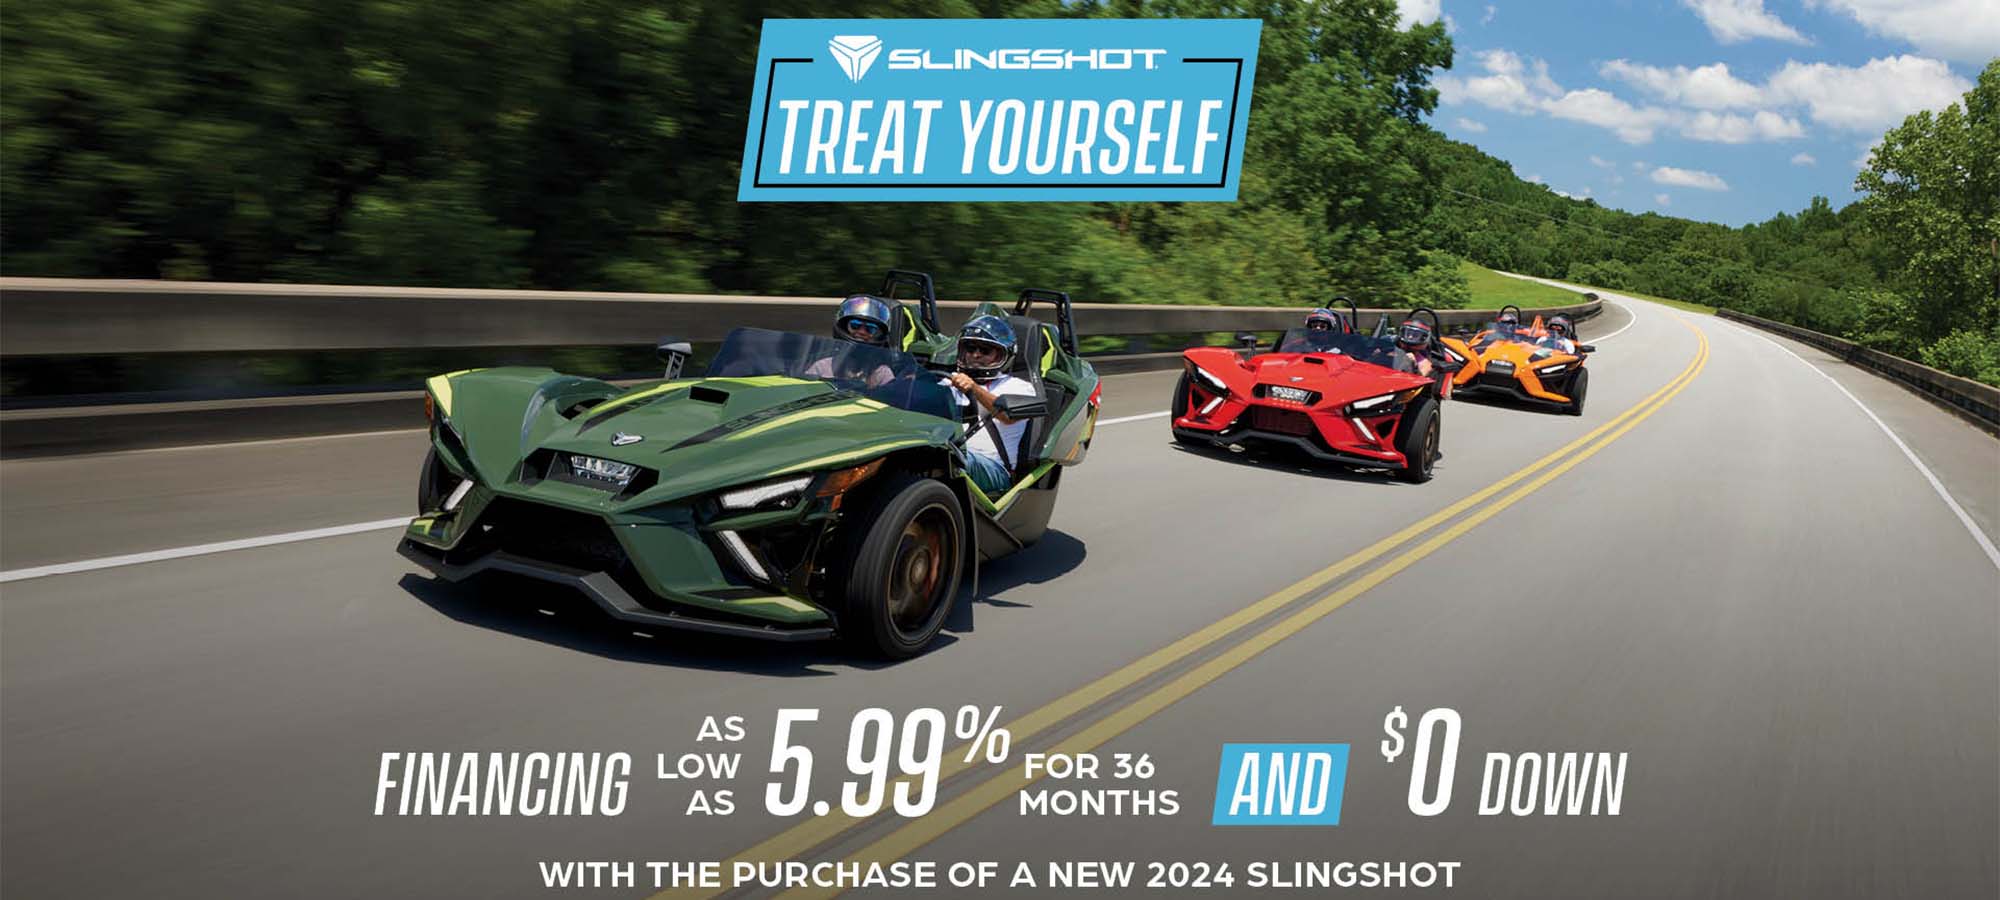 Slingshot US - Treat Yourself - Financing 5.99% at Indian Motorcycle of Northern Kentucky